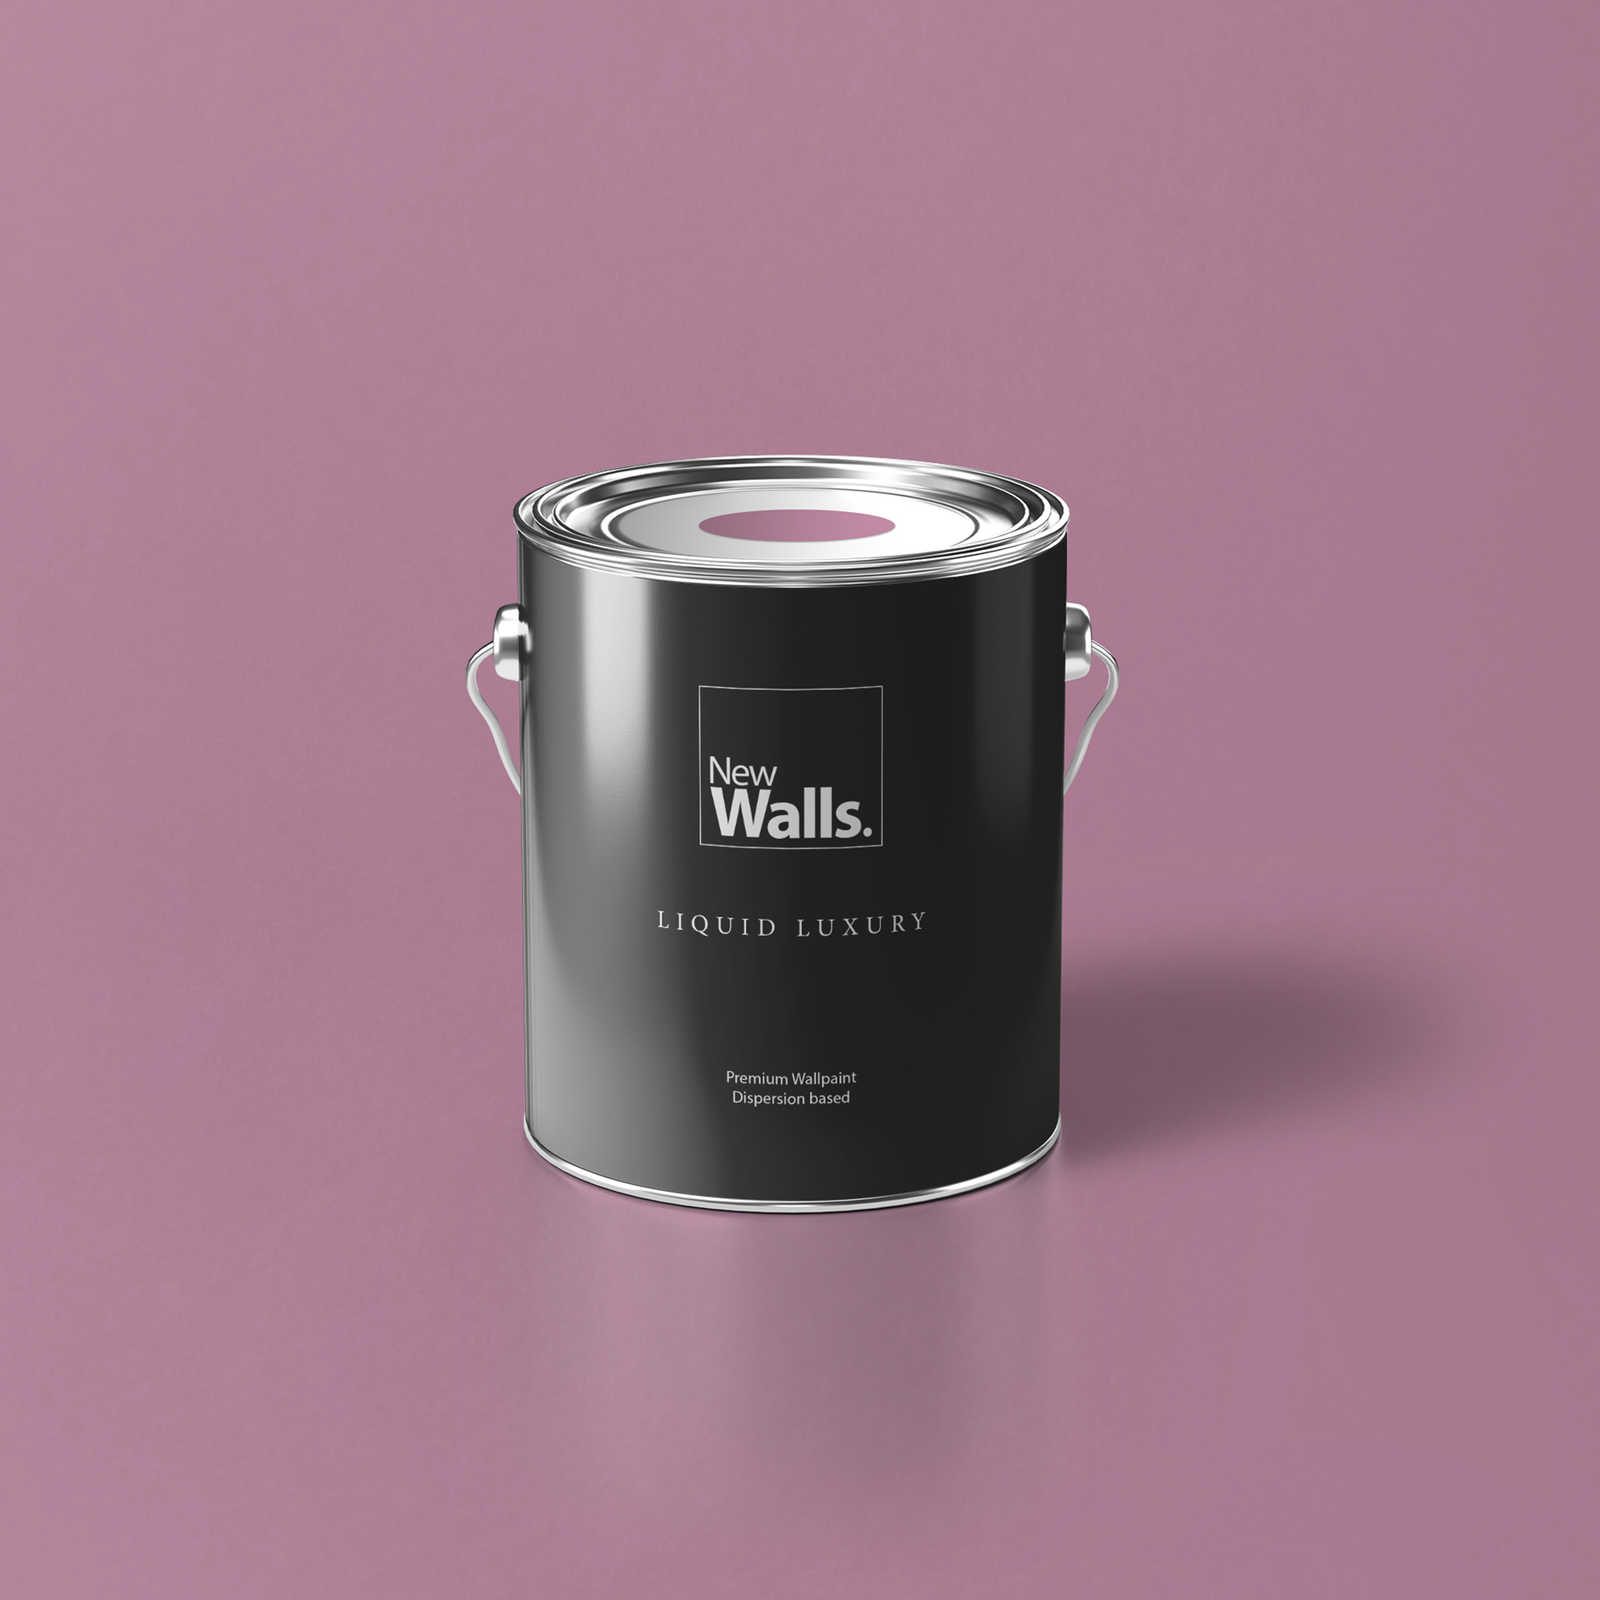 Premium Wall Paint Sensitive Berry »Beautiful Berry« NW210 – 2.5 litre
